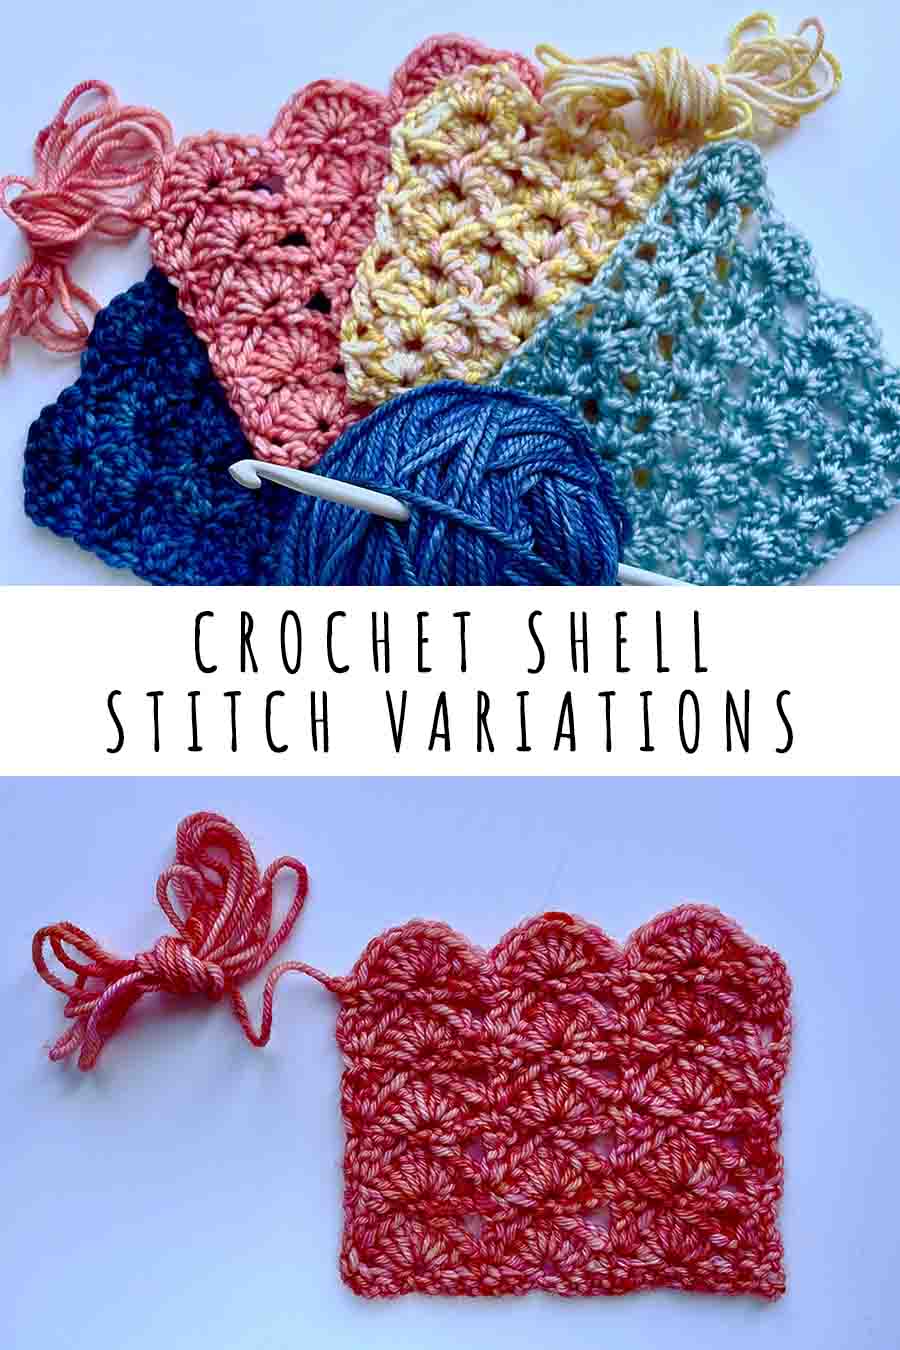 Crochet Shell Stitch Variations - 10 Of The Best To Try